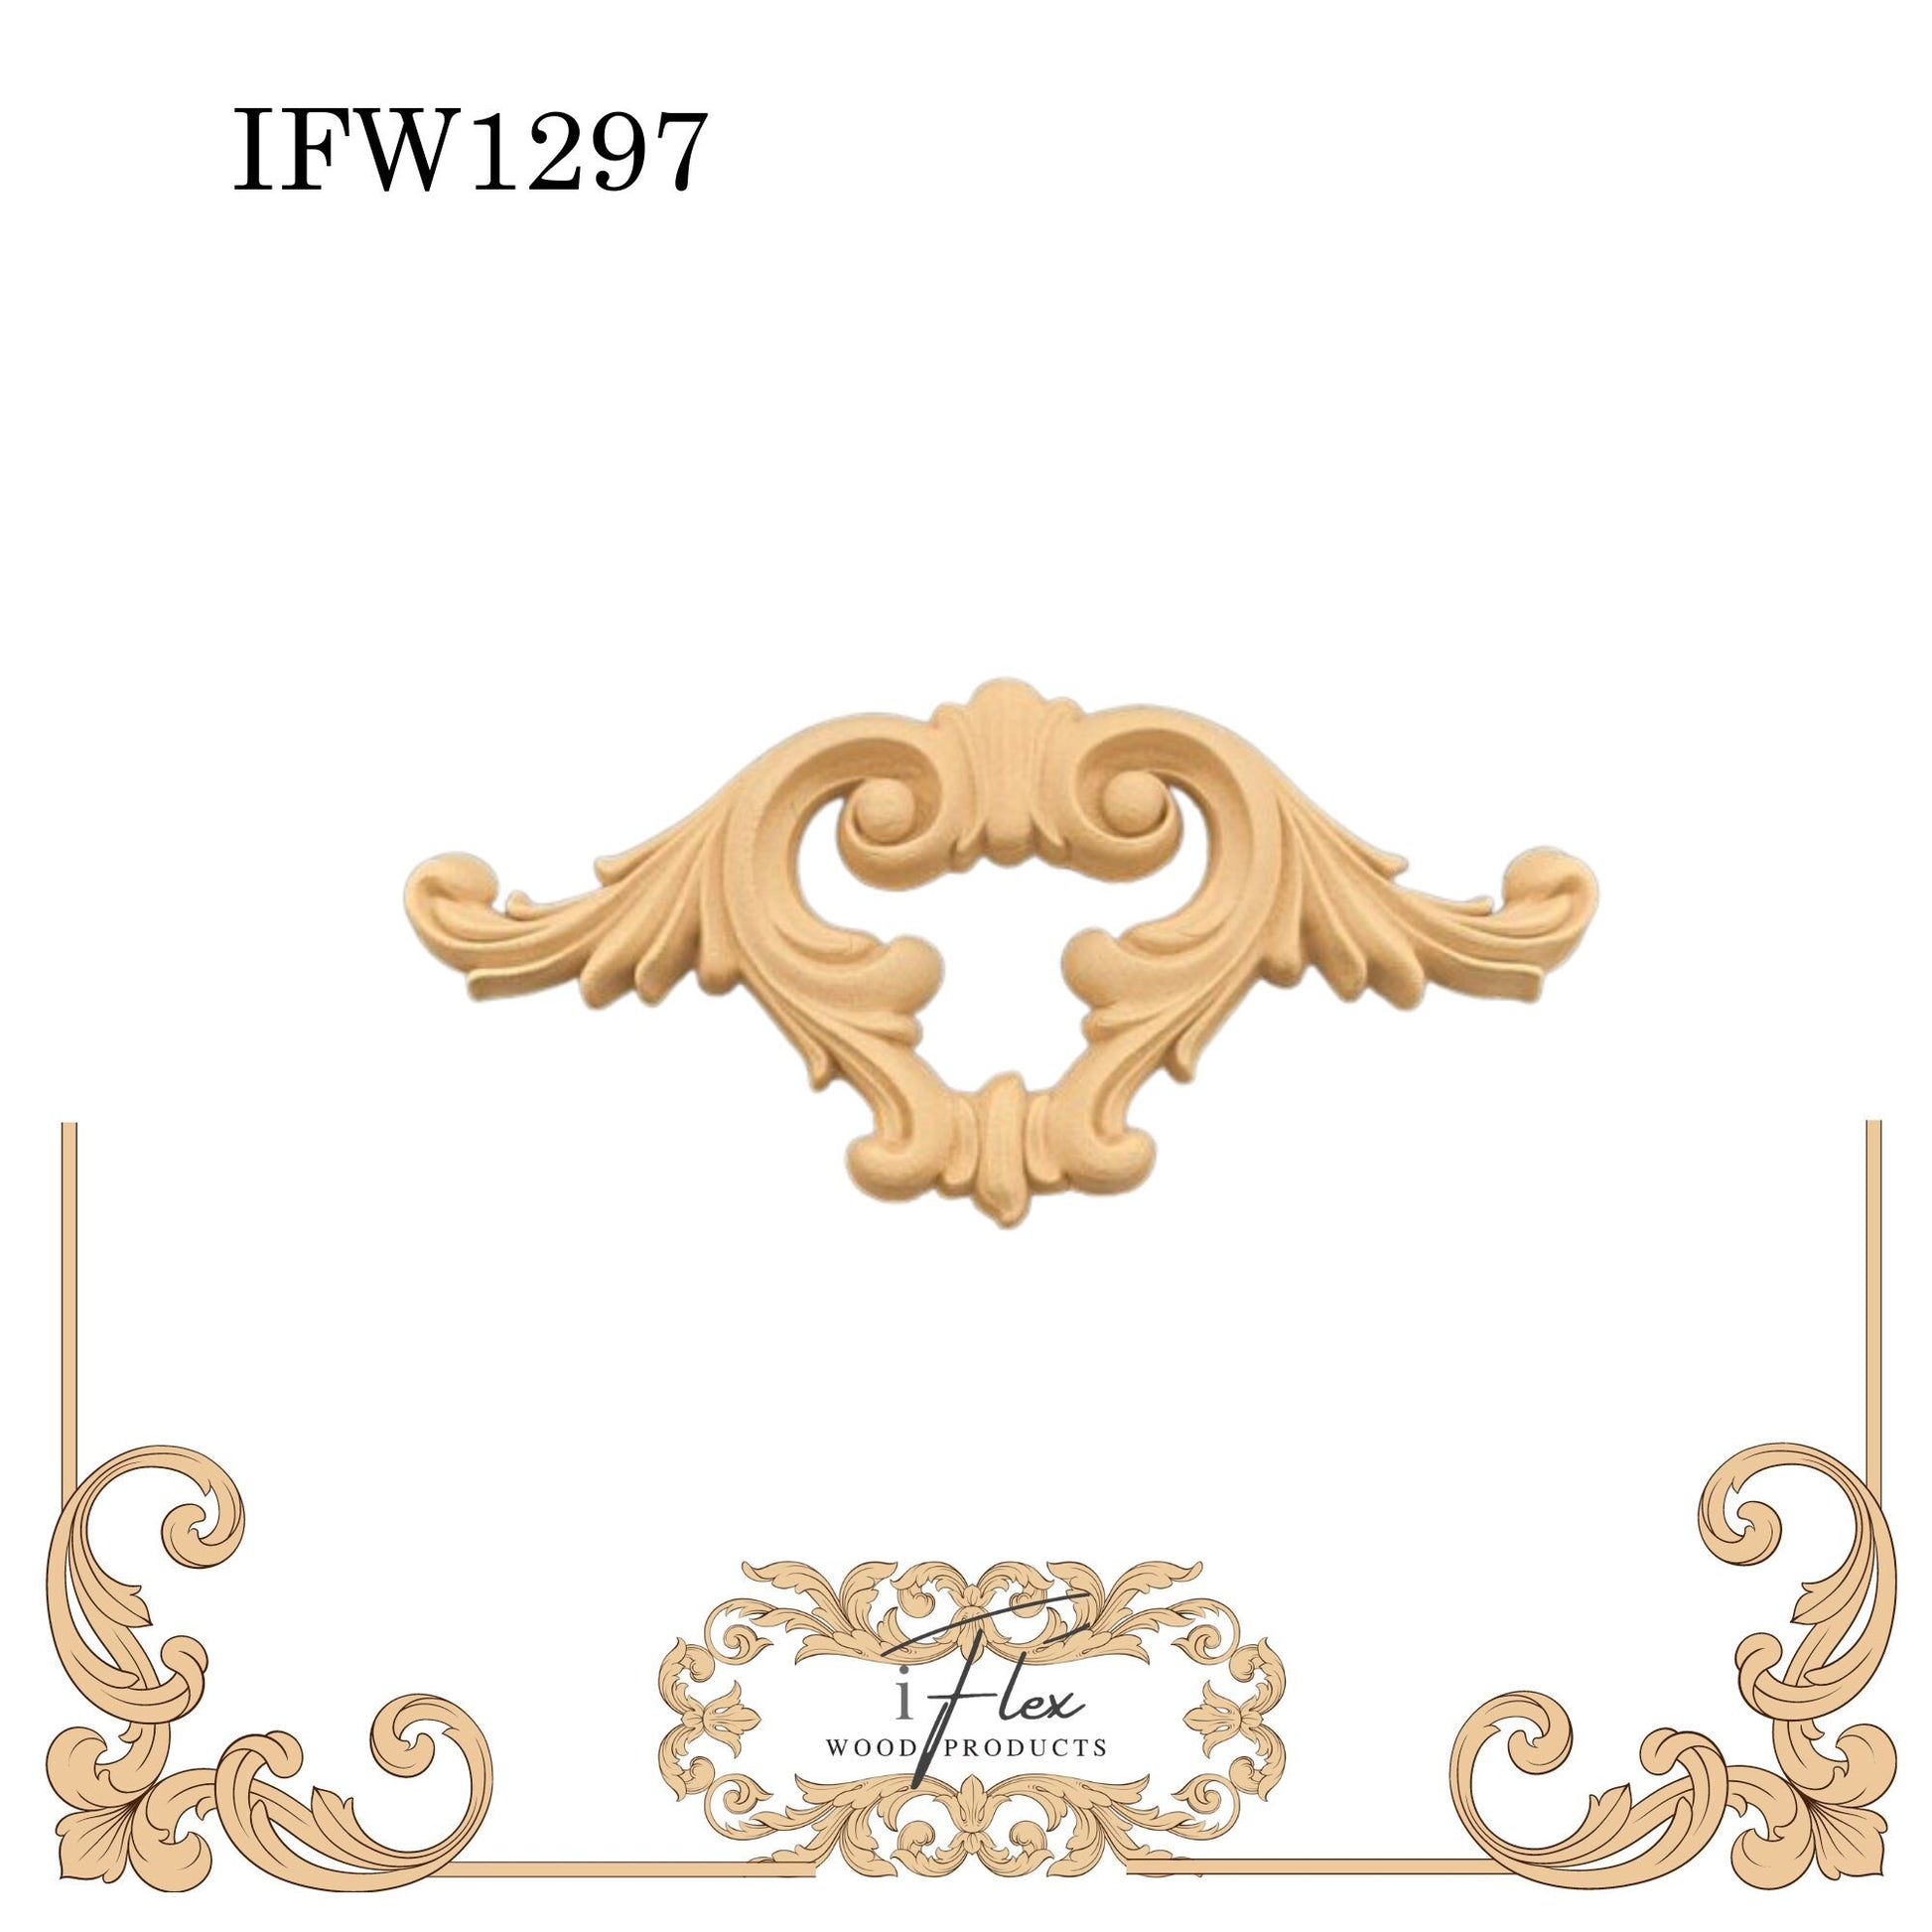 IFW 1297 iFlex Wood Products, bendable mouldings, flexible, wooden appliques, centerpiece